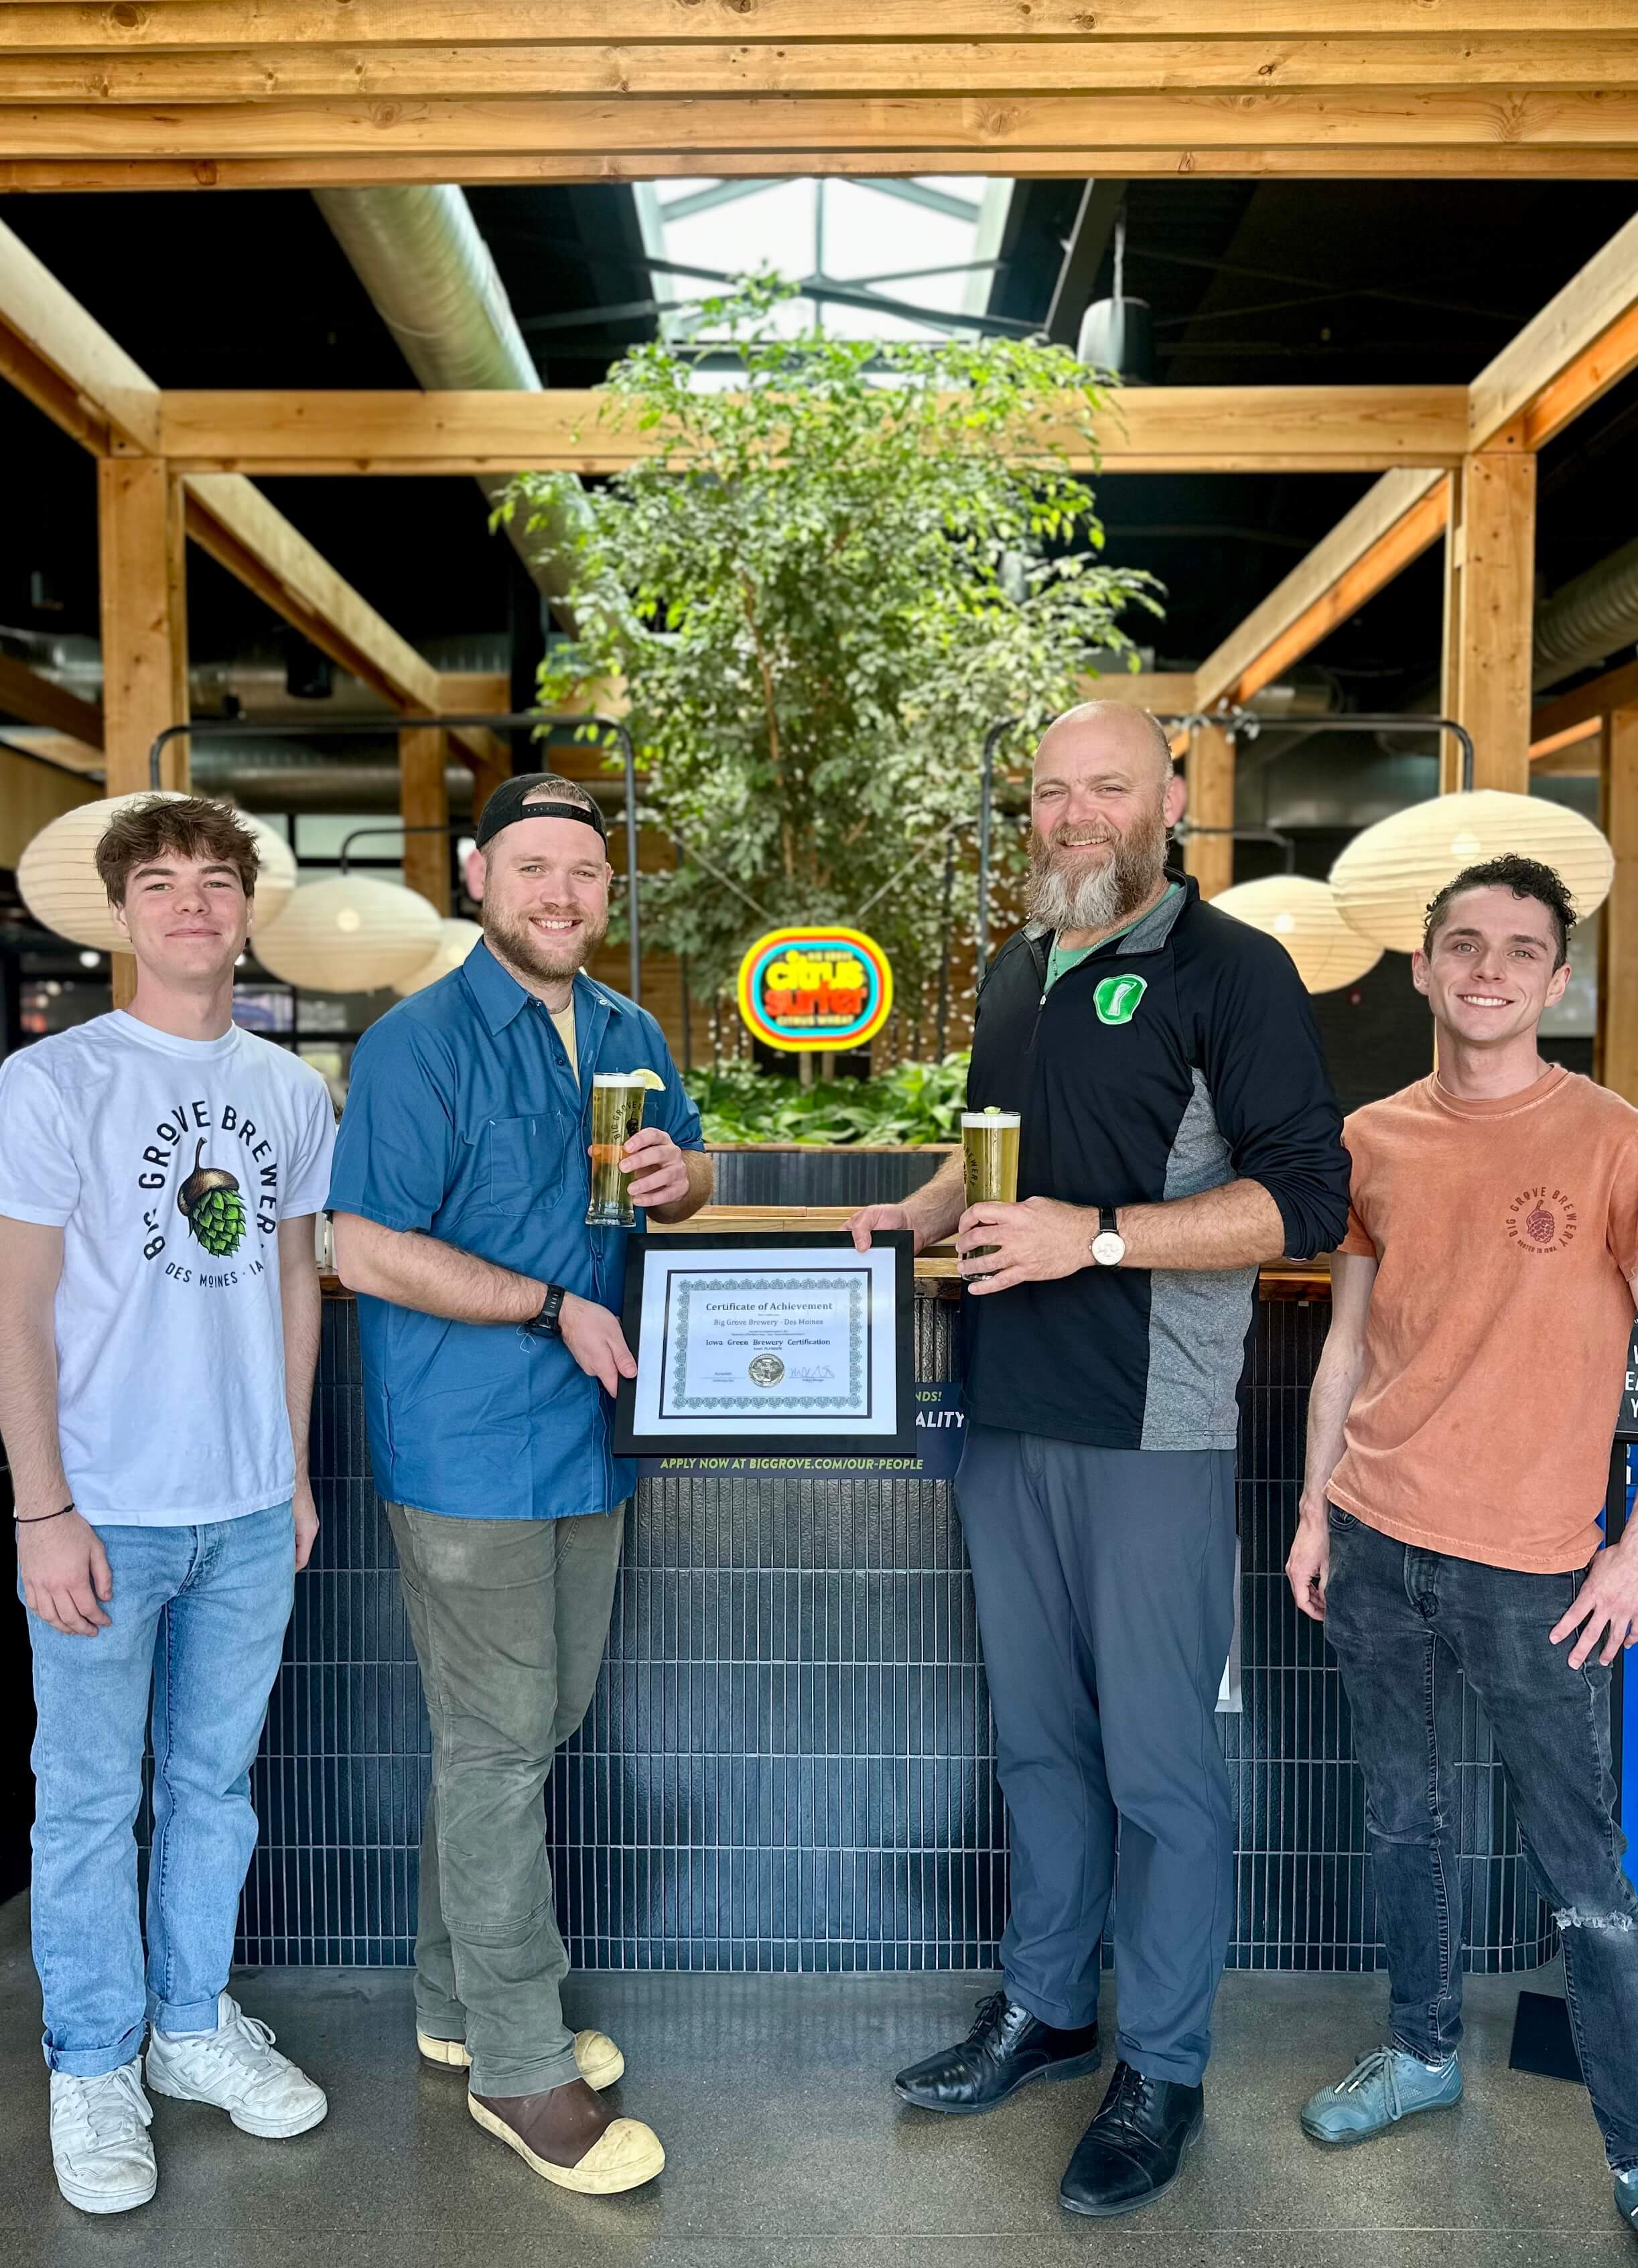 Staff members of Big Grove Des Moines accept their Iowa Green Brewery Certification